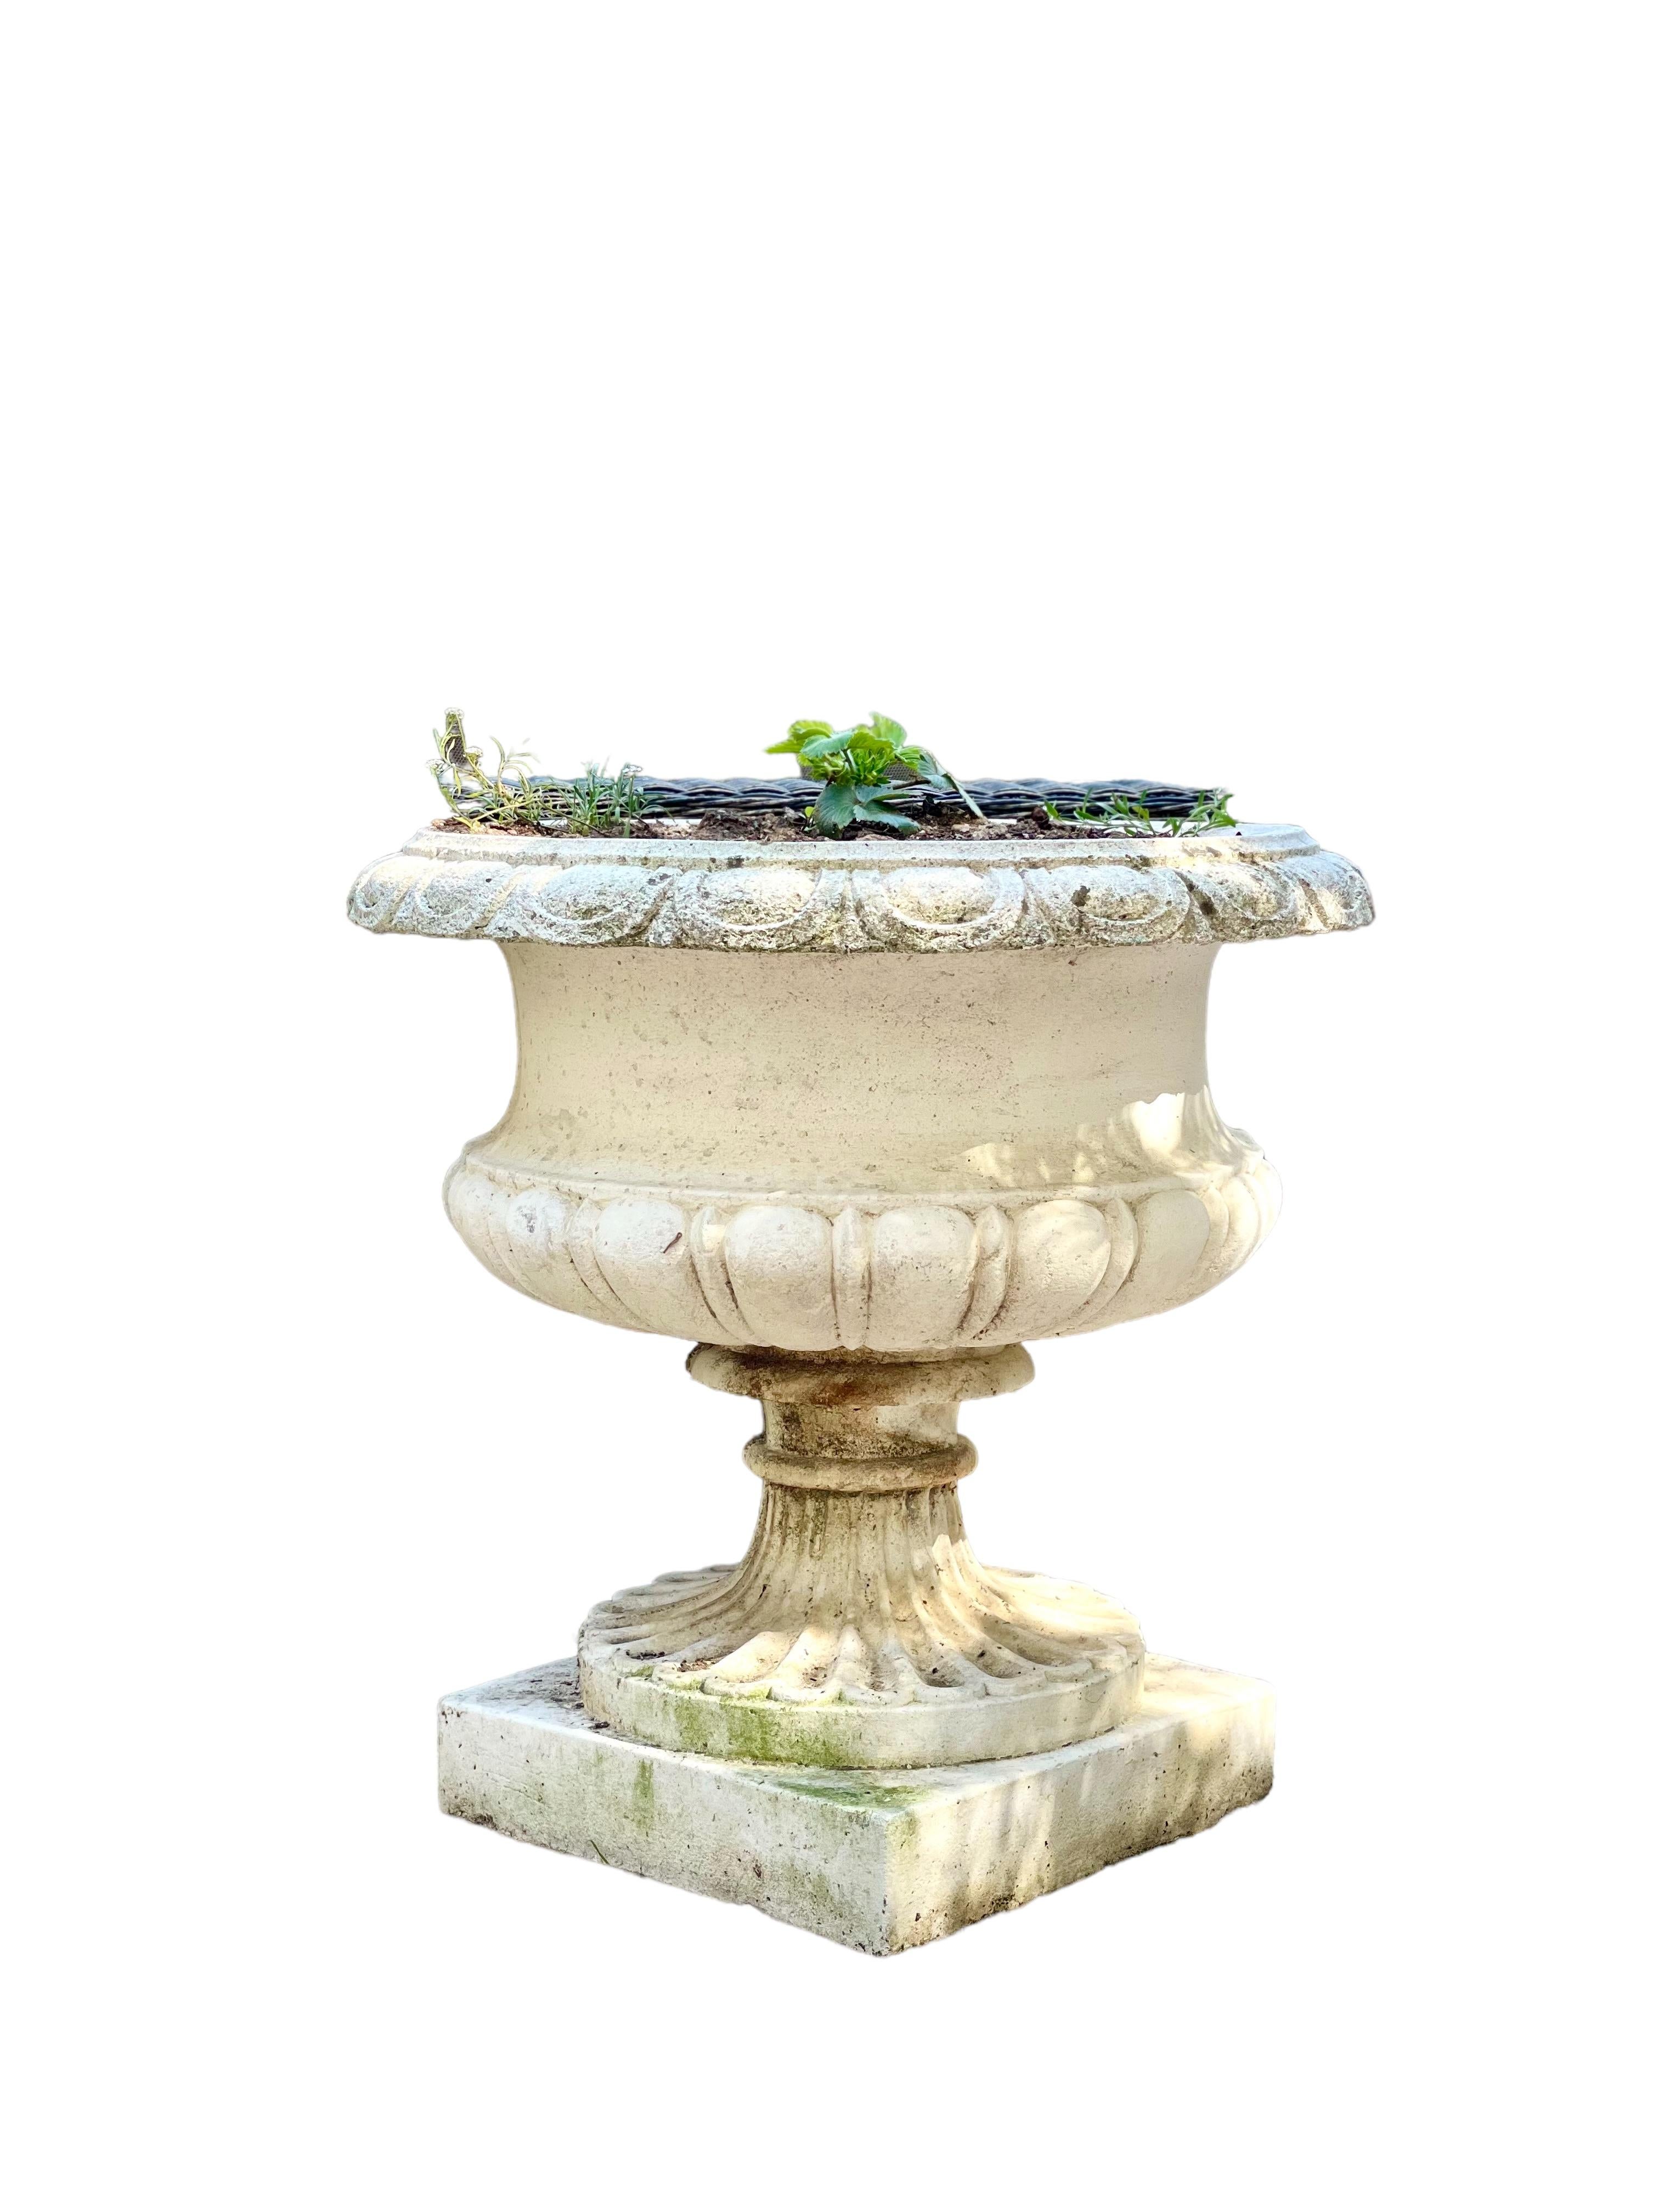 An imposing pair of antique Chambord garden urns, in reconstituted stone, with a nicely weathered appearance in keeping with their age and outdoor use. 
These exquisite garden pieces feature a deep, circular body festooned with gadroon mouldings,